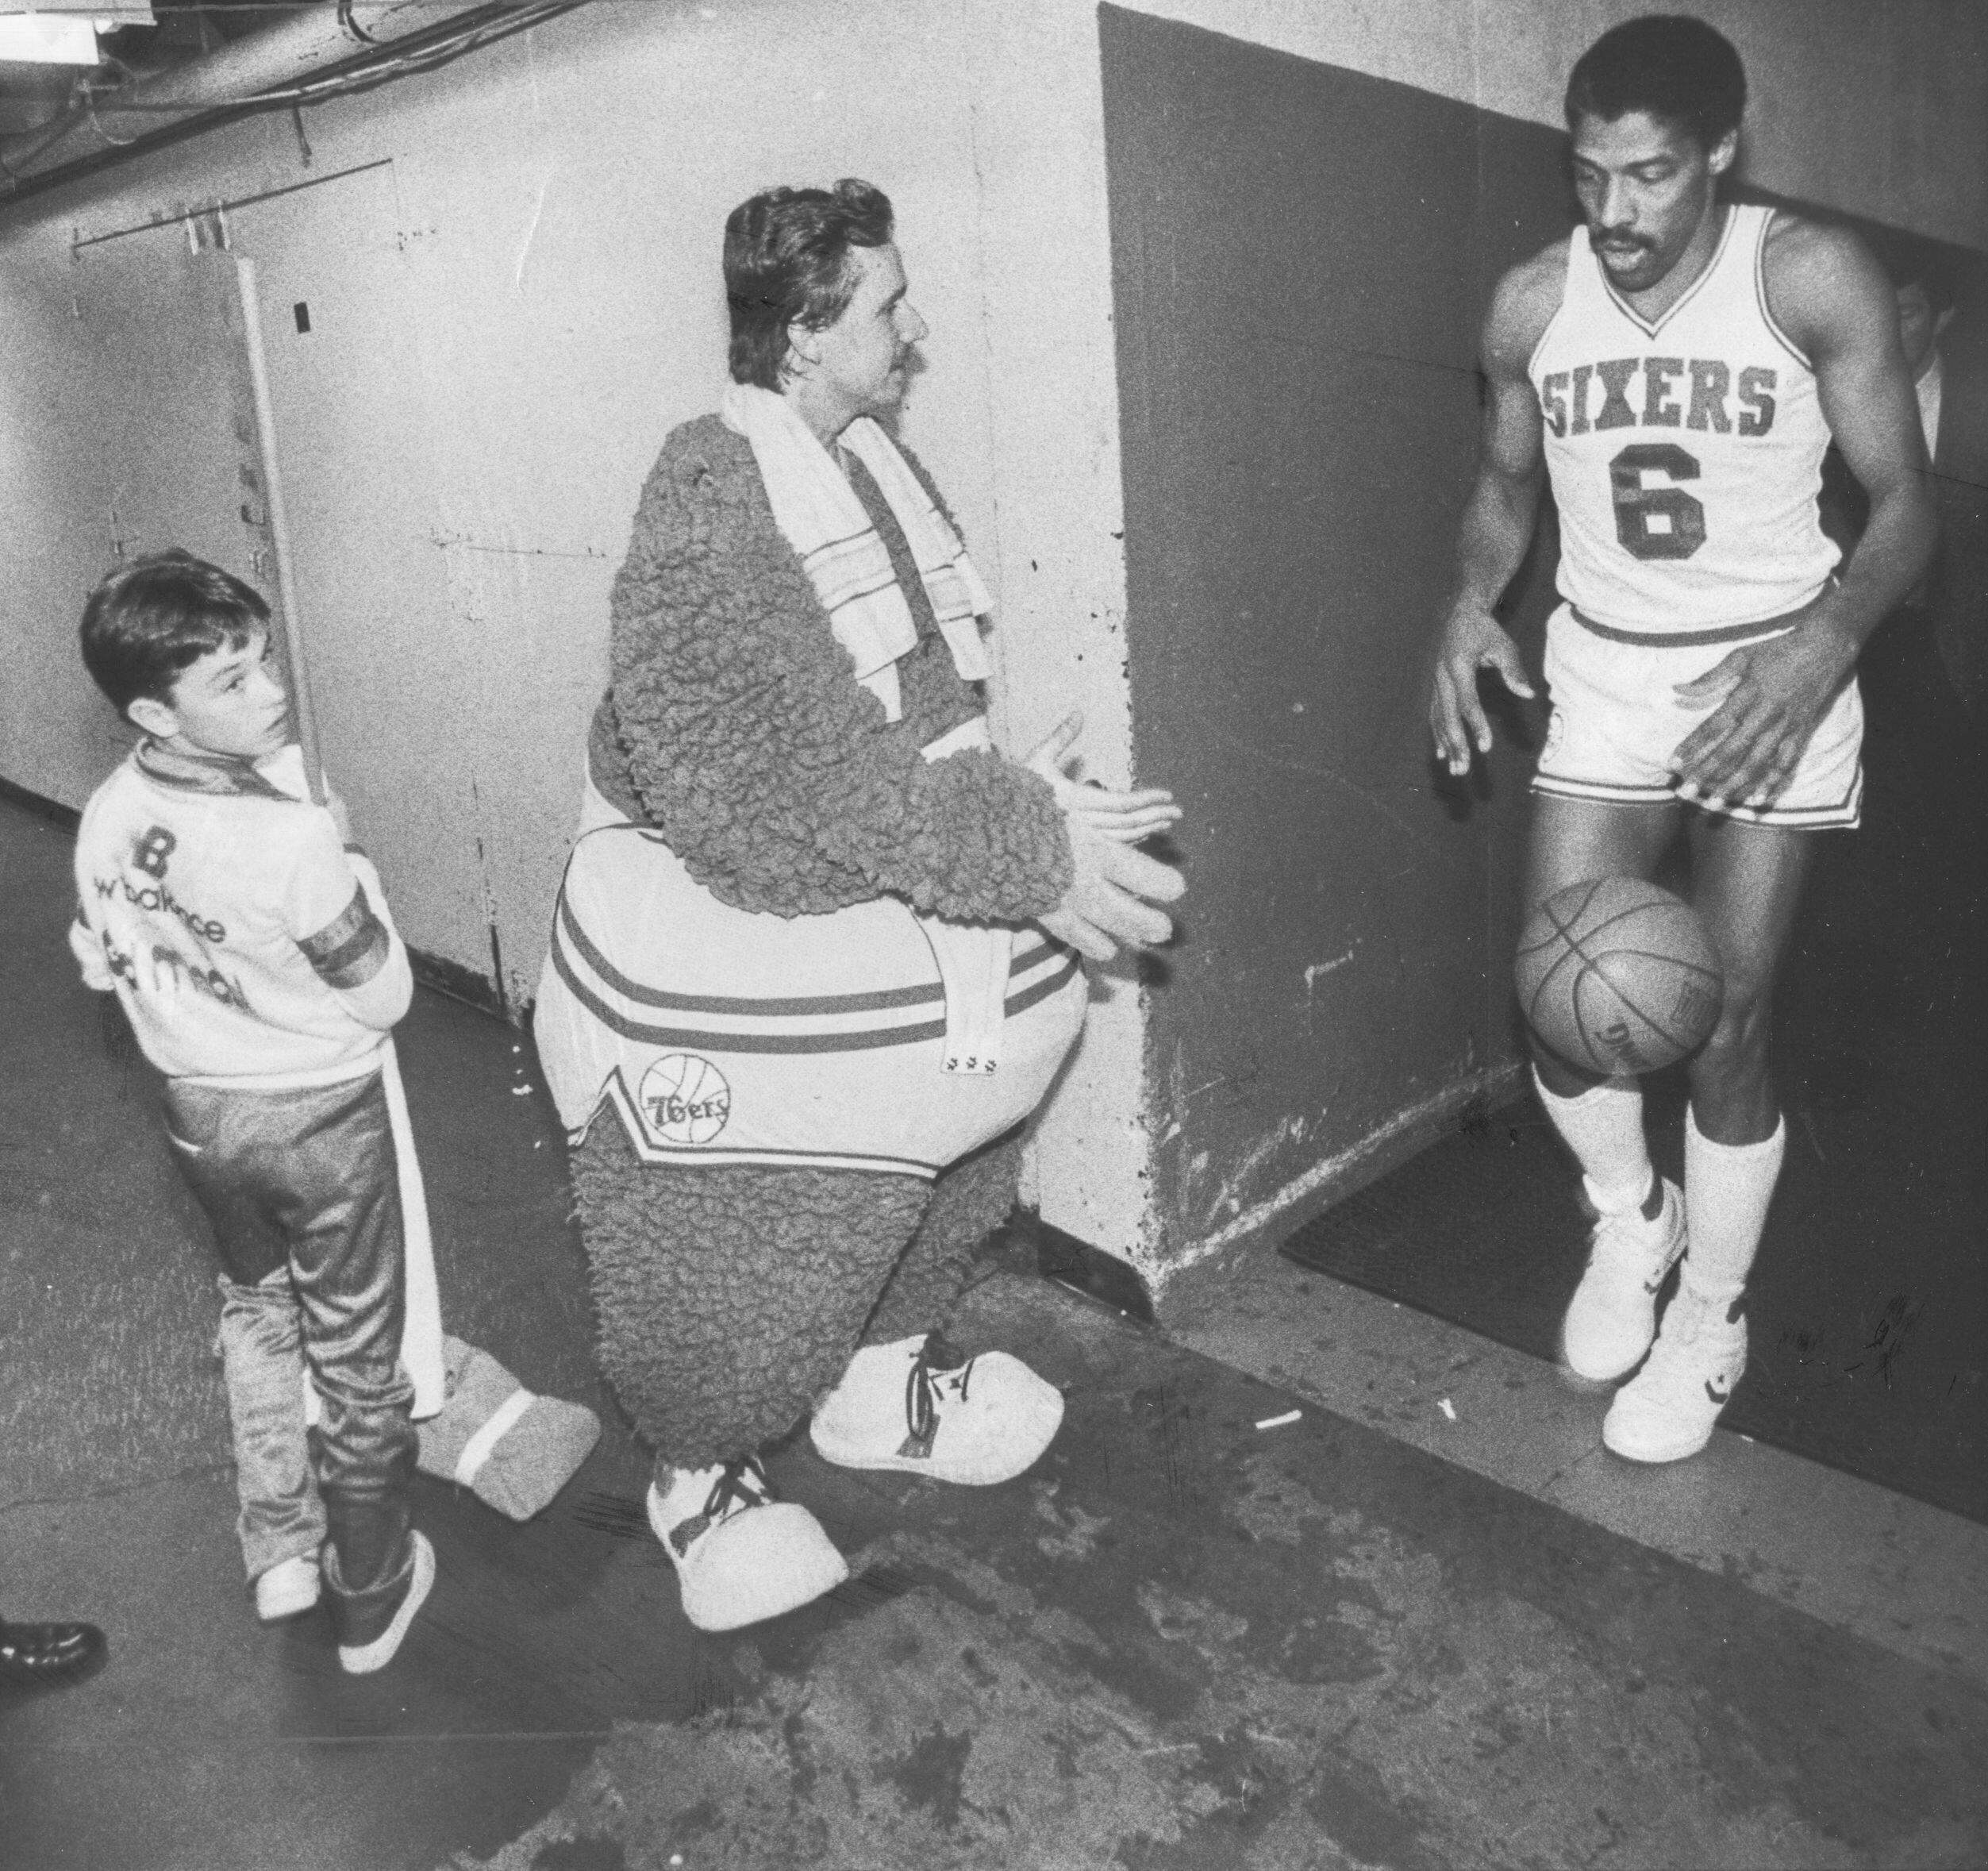 Bridesburg native did impossible 40 years ago, made Sixers fans fall for  Big Shot